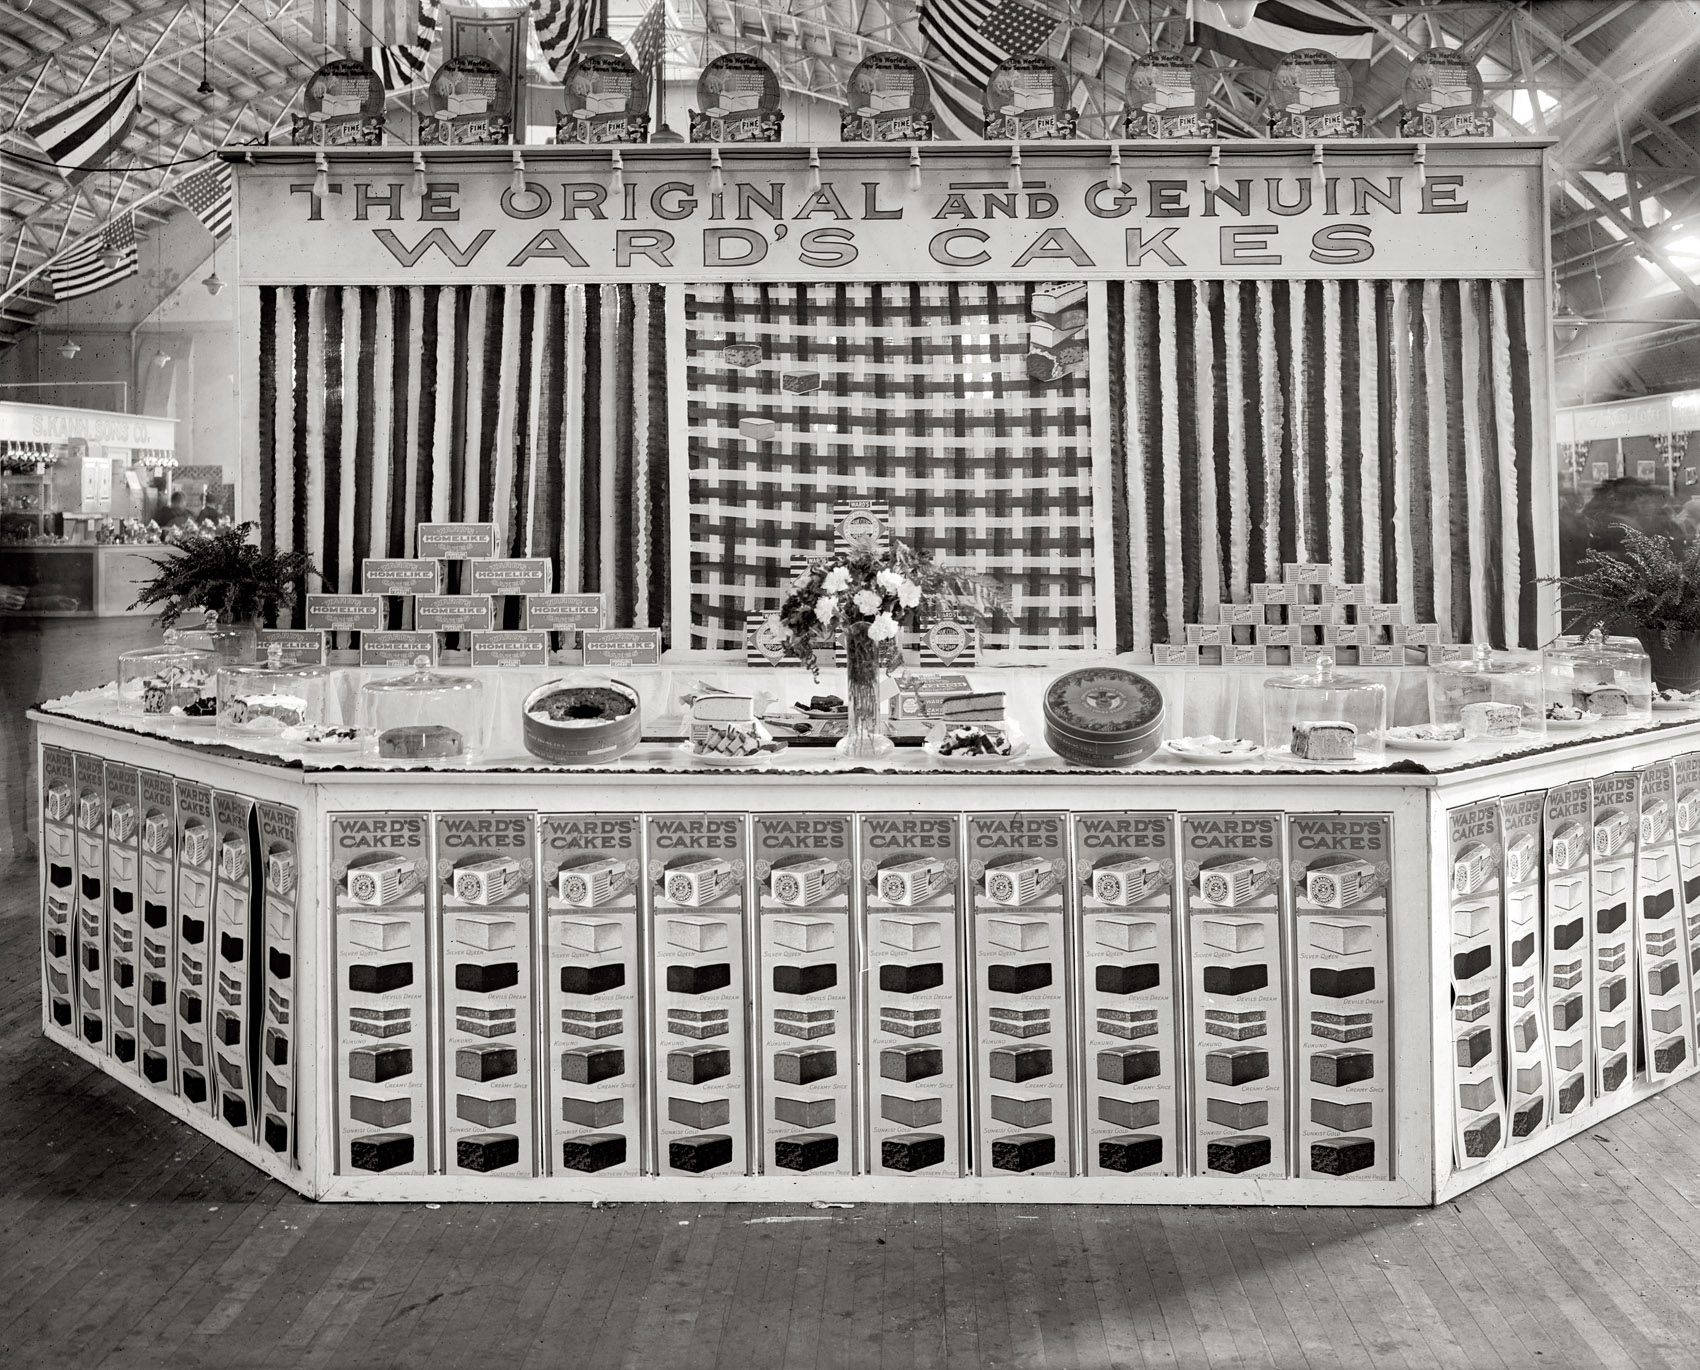 Washington circa 1922. "Food show. Ward exhibit." Among the tempting varieties of Ward's Cakes on display here: Silver Queen, Devils Dream, Kukuno, Creamy Spice, Sunkist Gold and Southern Pride. Plus Paradise Fruit Cake and something called "Homelike." View full size. National Photo Company glass negative.